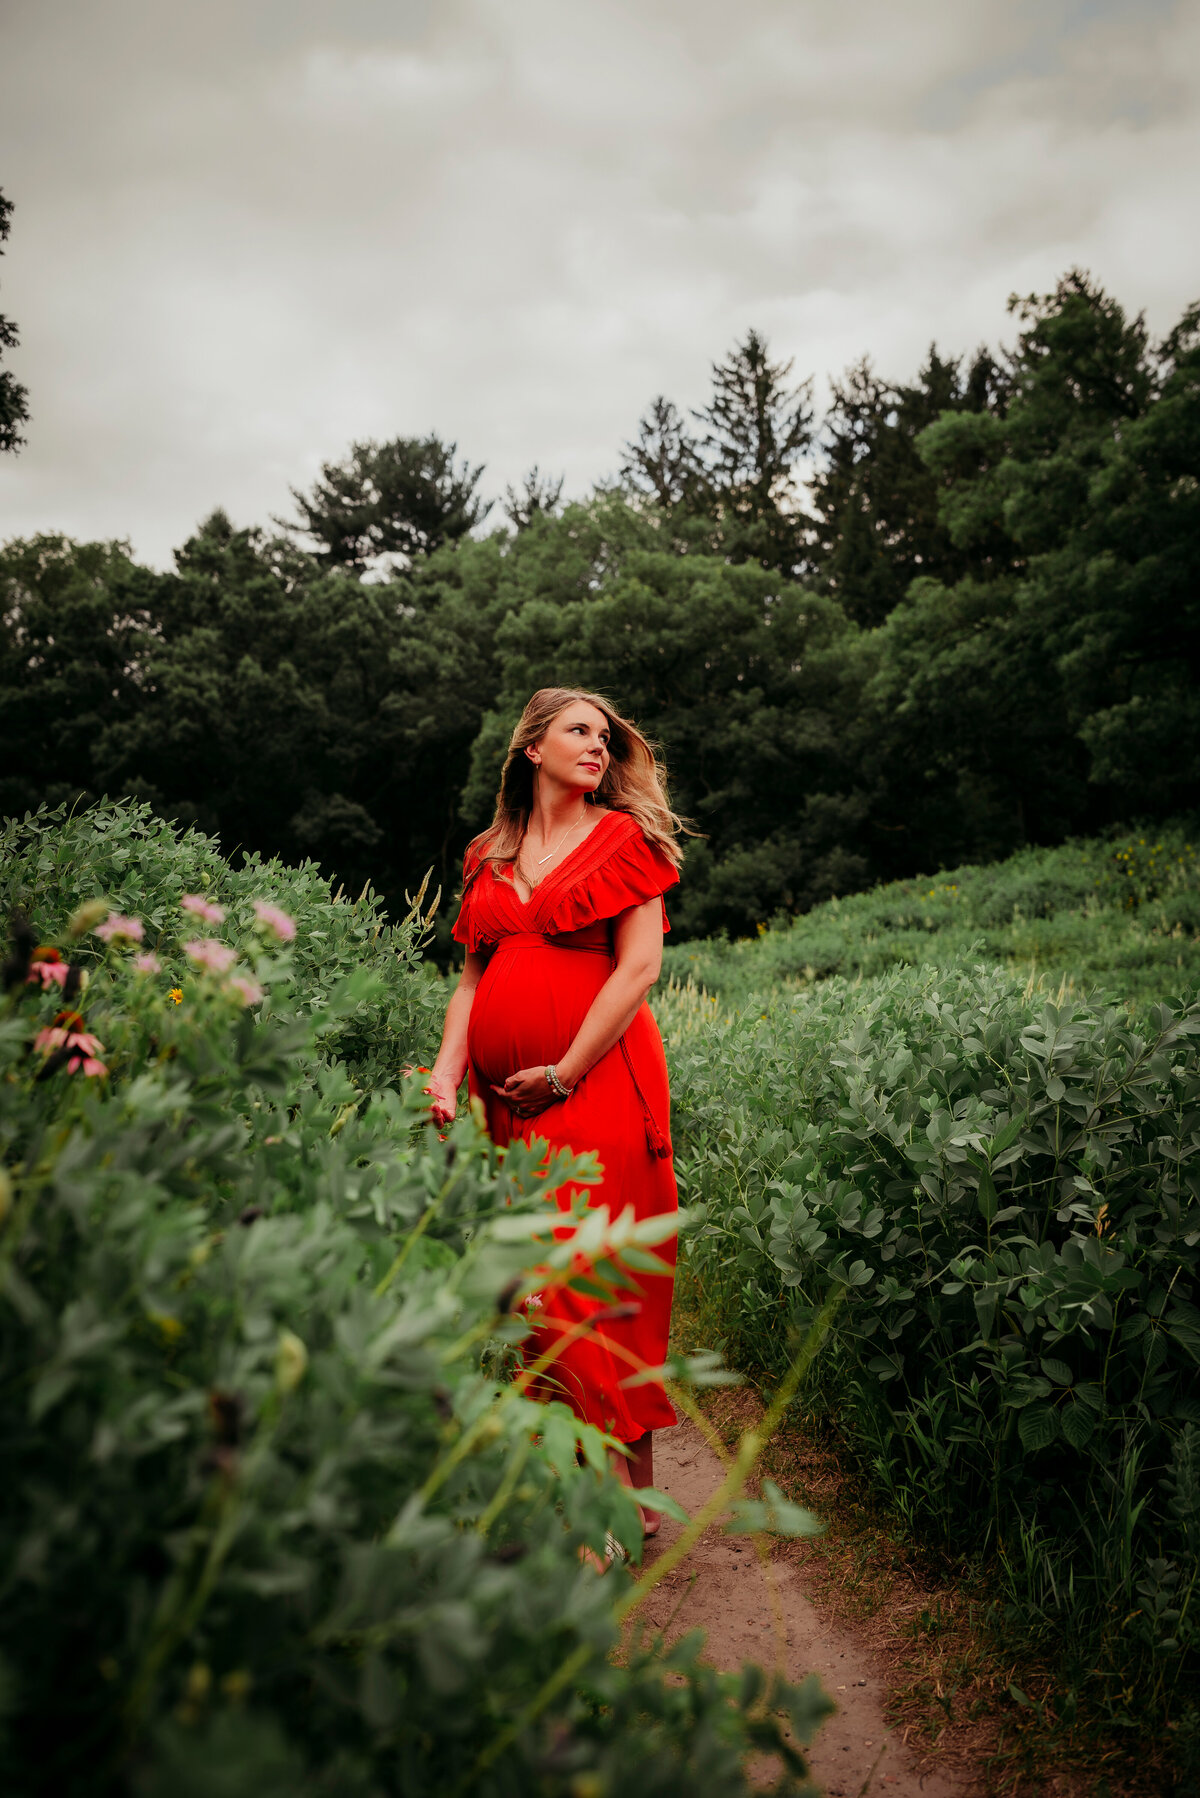 Compose a symphony of love in maternity portraits amidst Minneapolis parks. Shannon Kathleen Photography turns nature into a harmonious backdrop for your glowing journey.